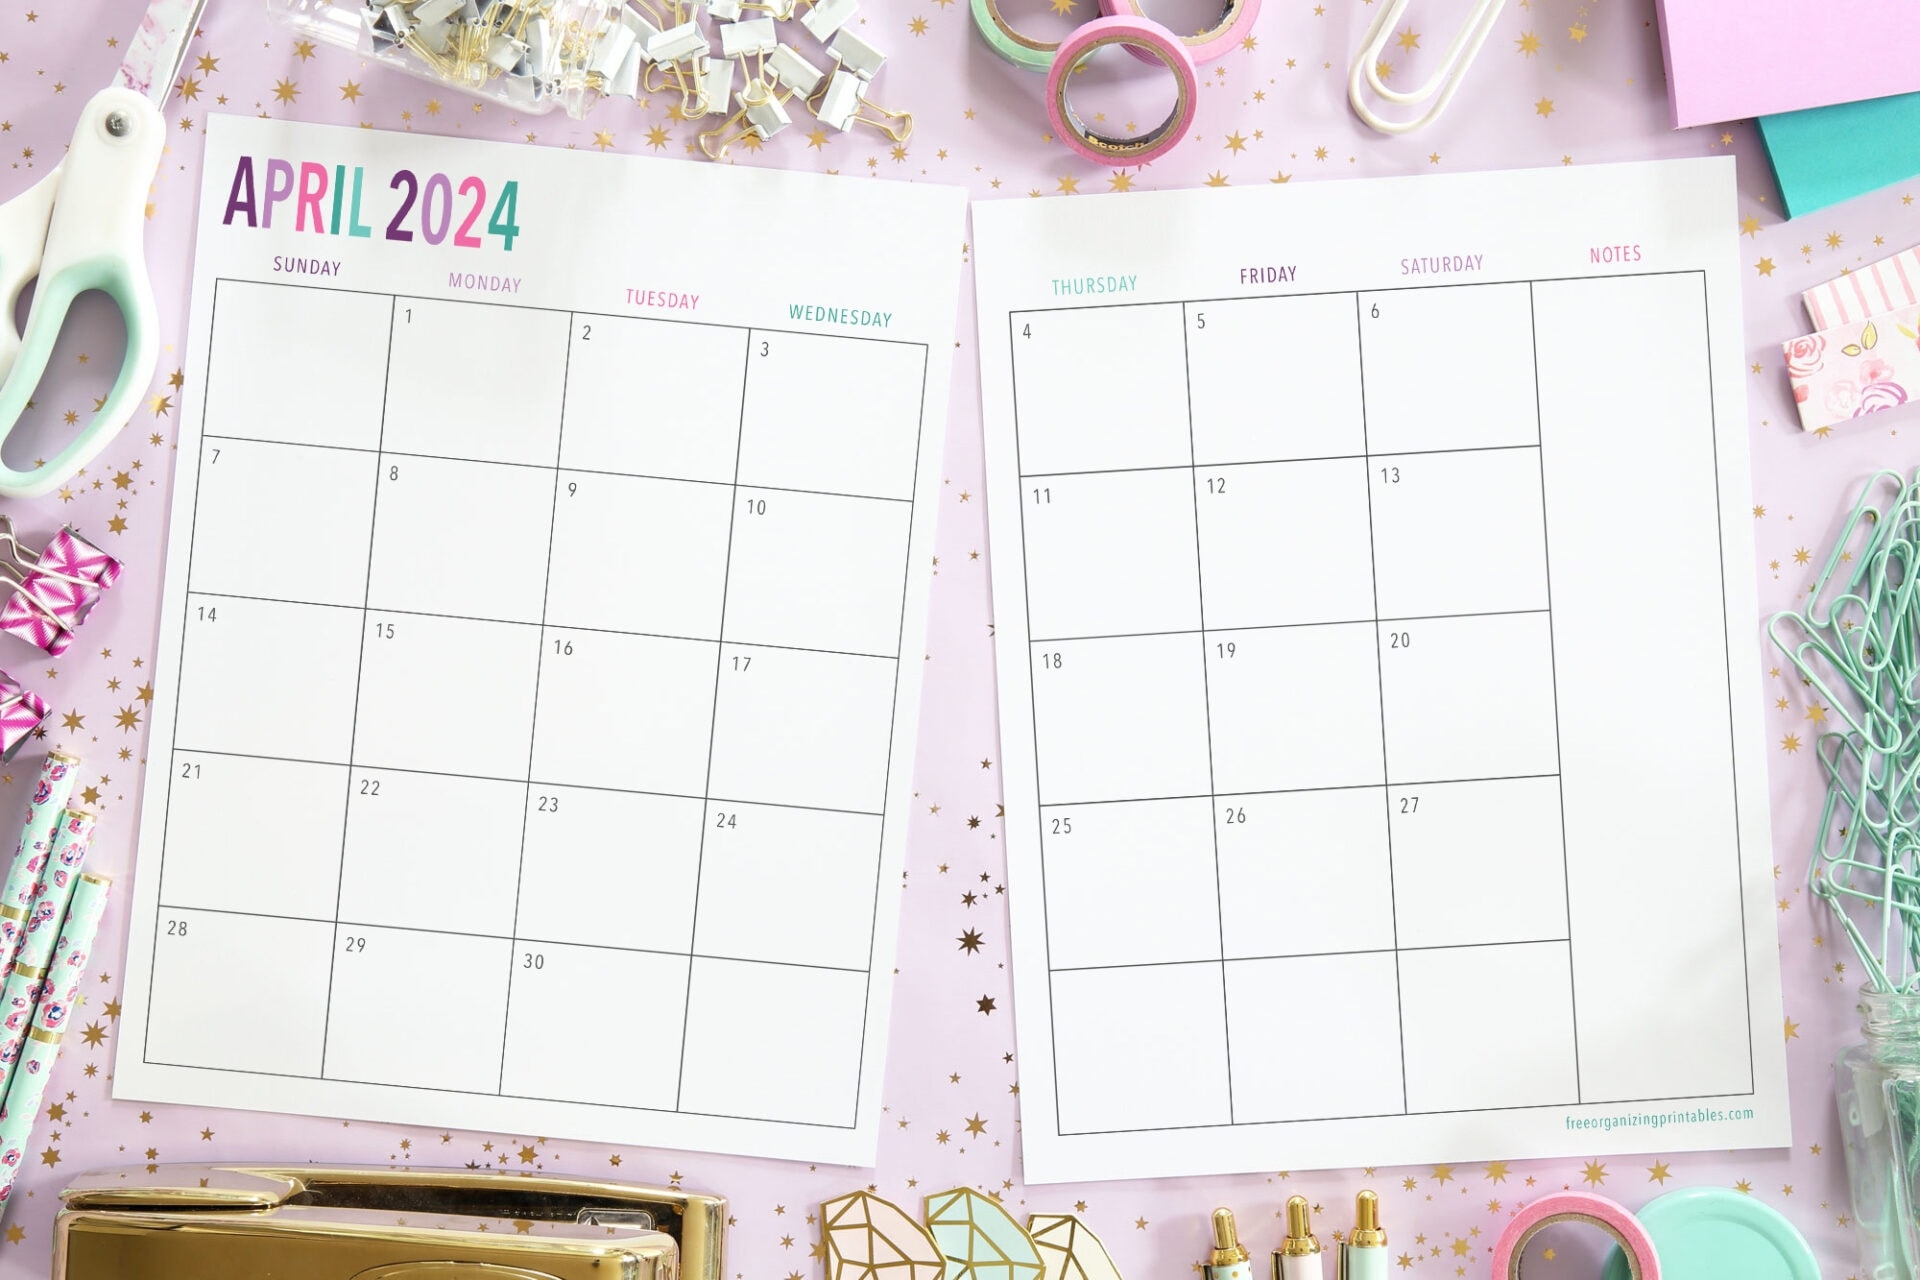 Free Printable 2 Page Blank Monthly Calendar 2024 with Free Printable Bi Monthly Calendar 2024